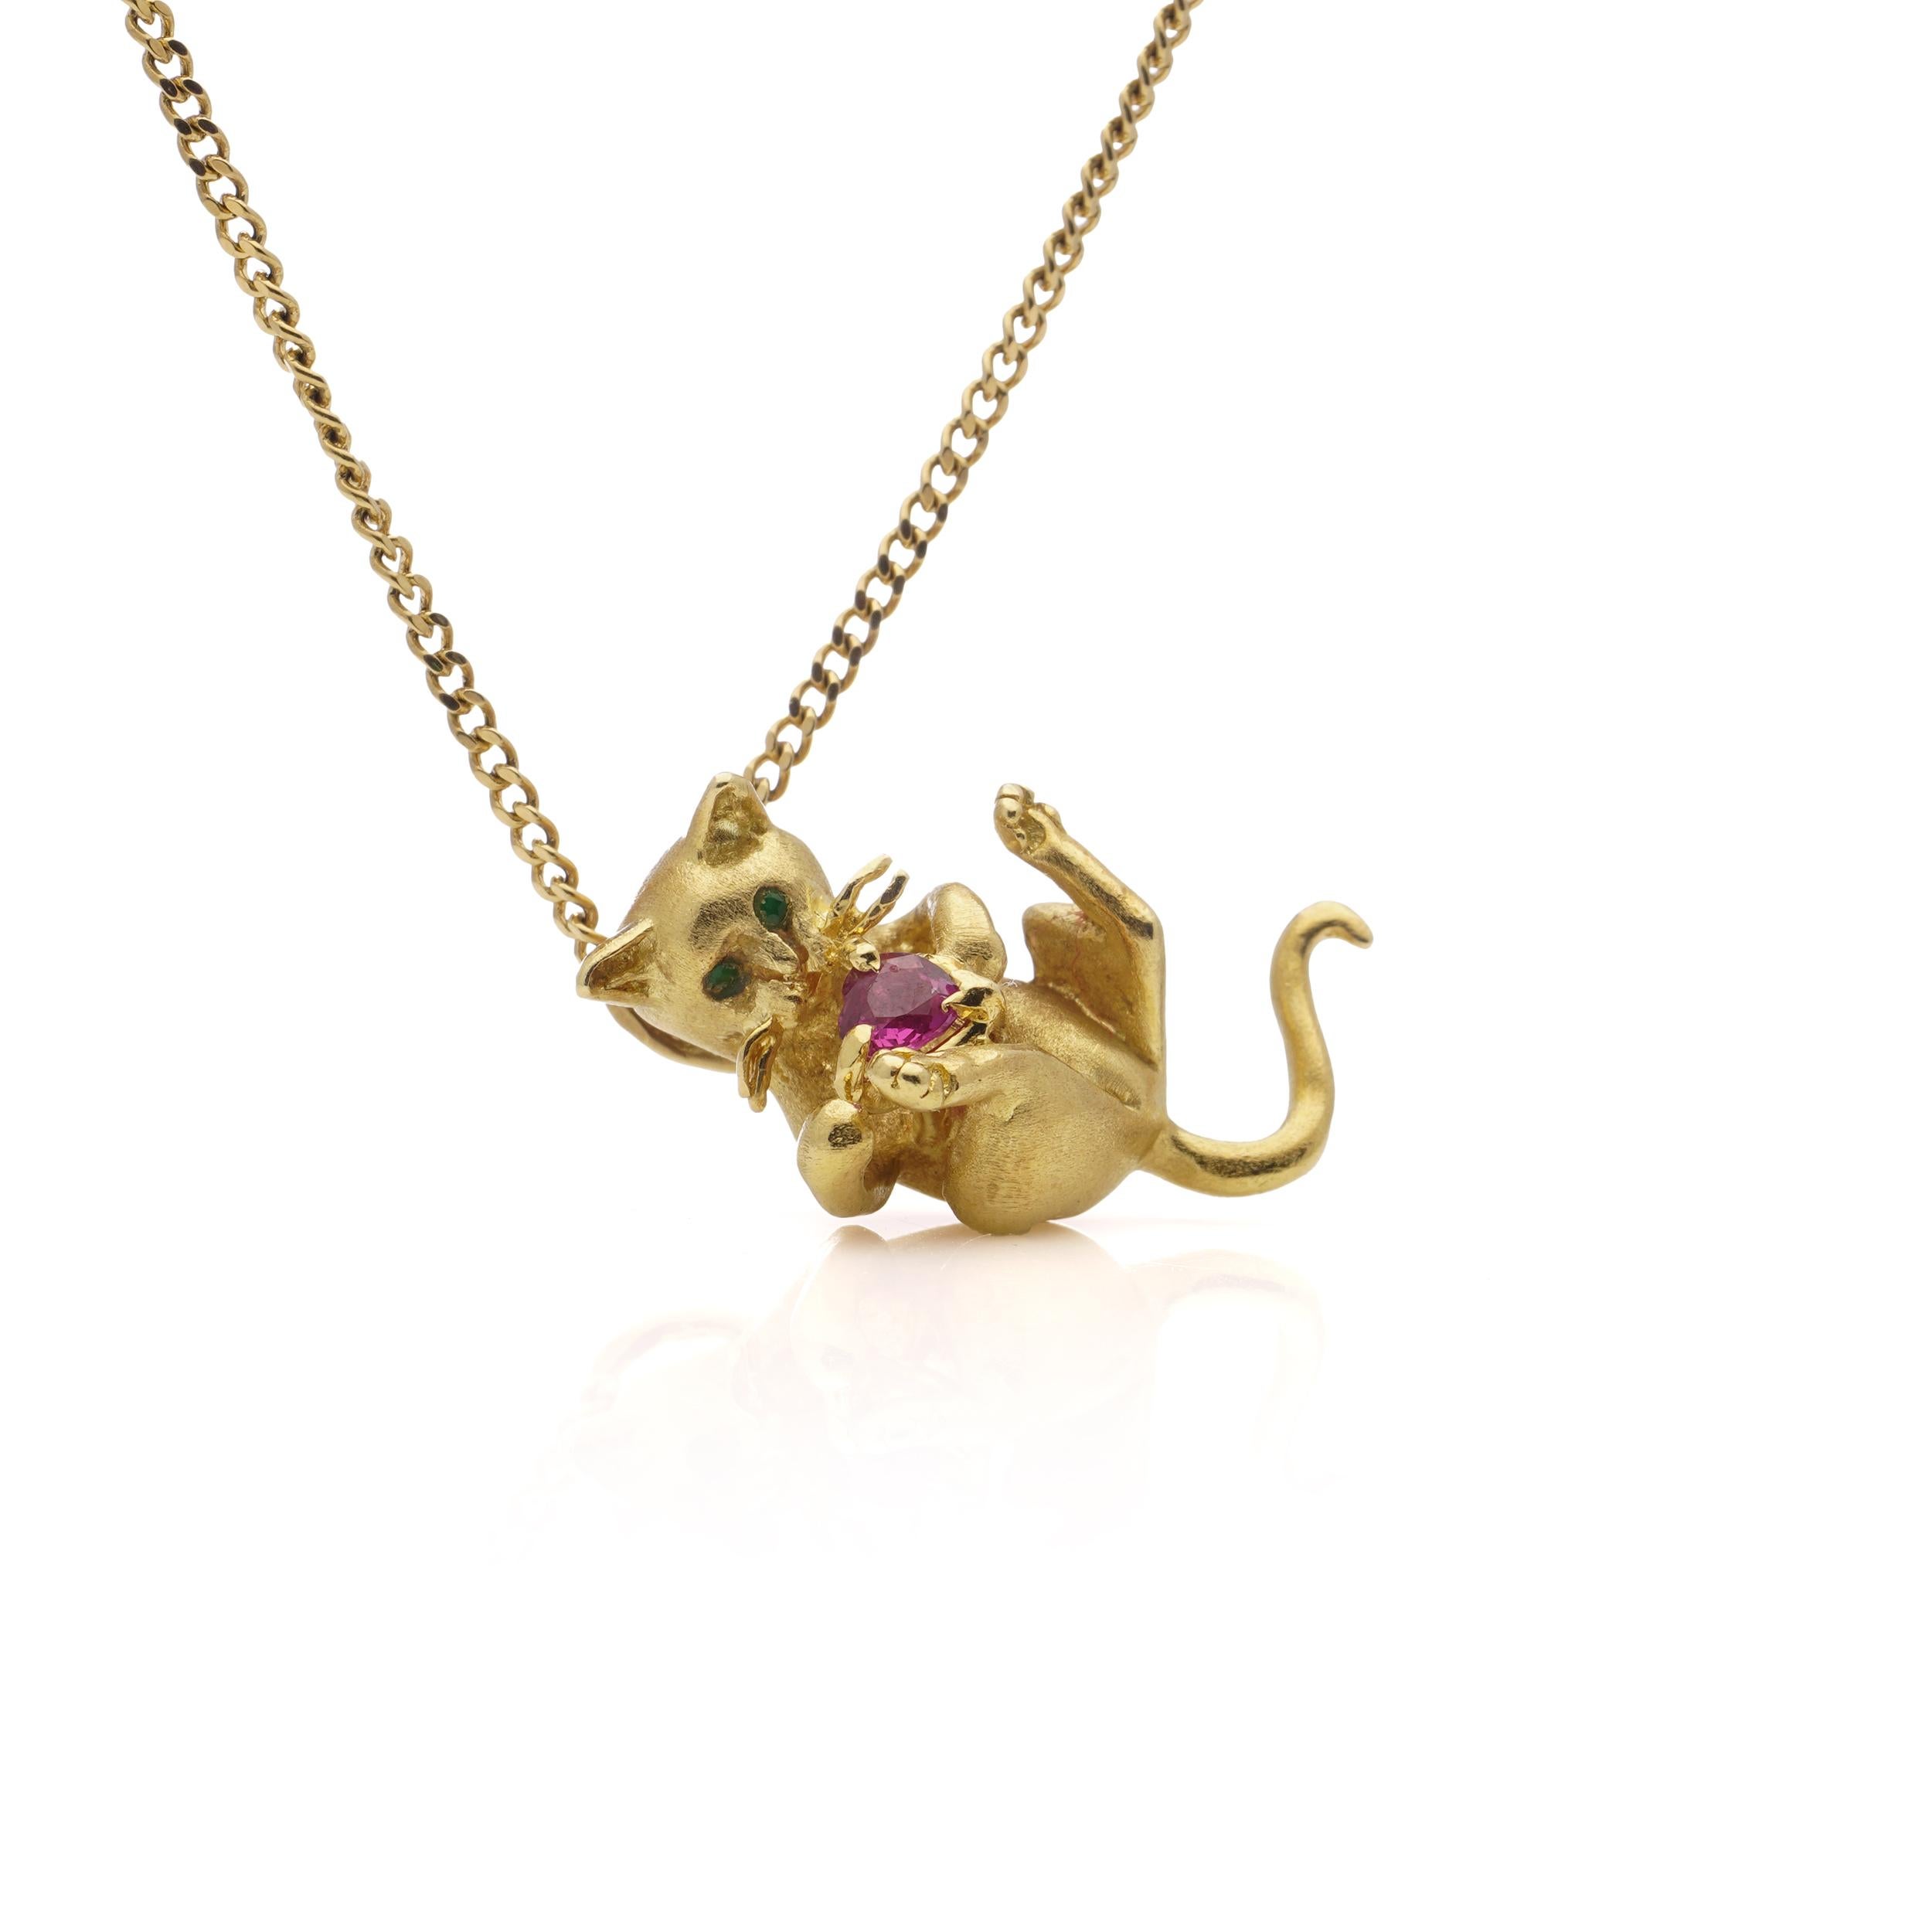 Women's Fred Paris 18kt. yellow gold chain necklace with kitty holding ruby pendant